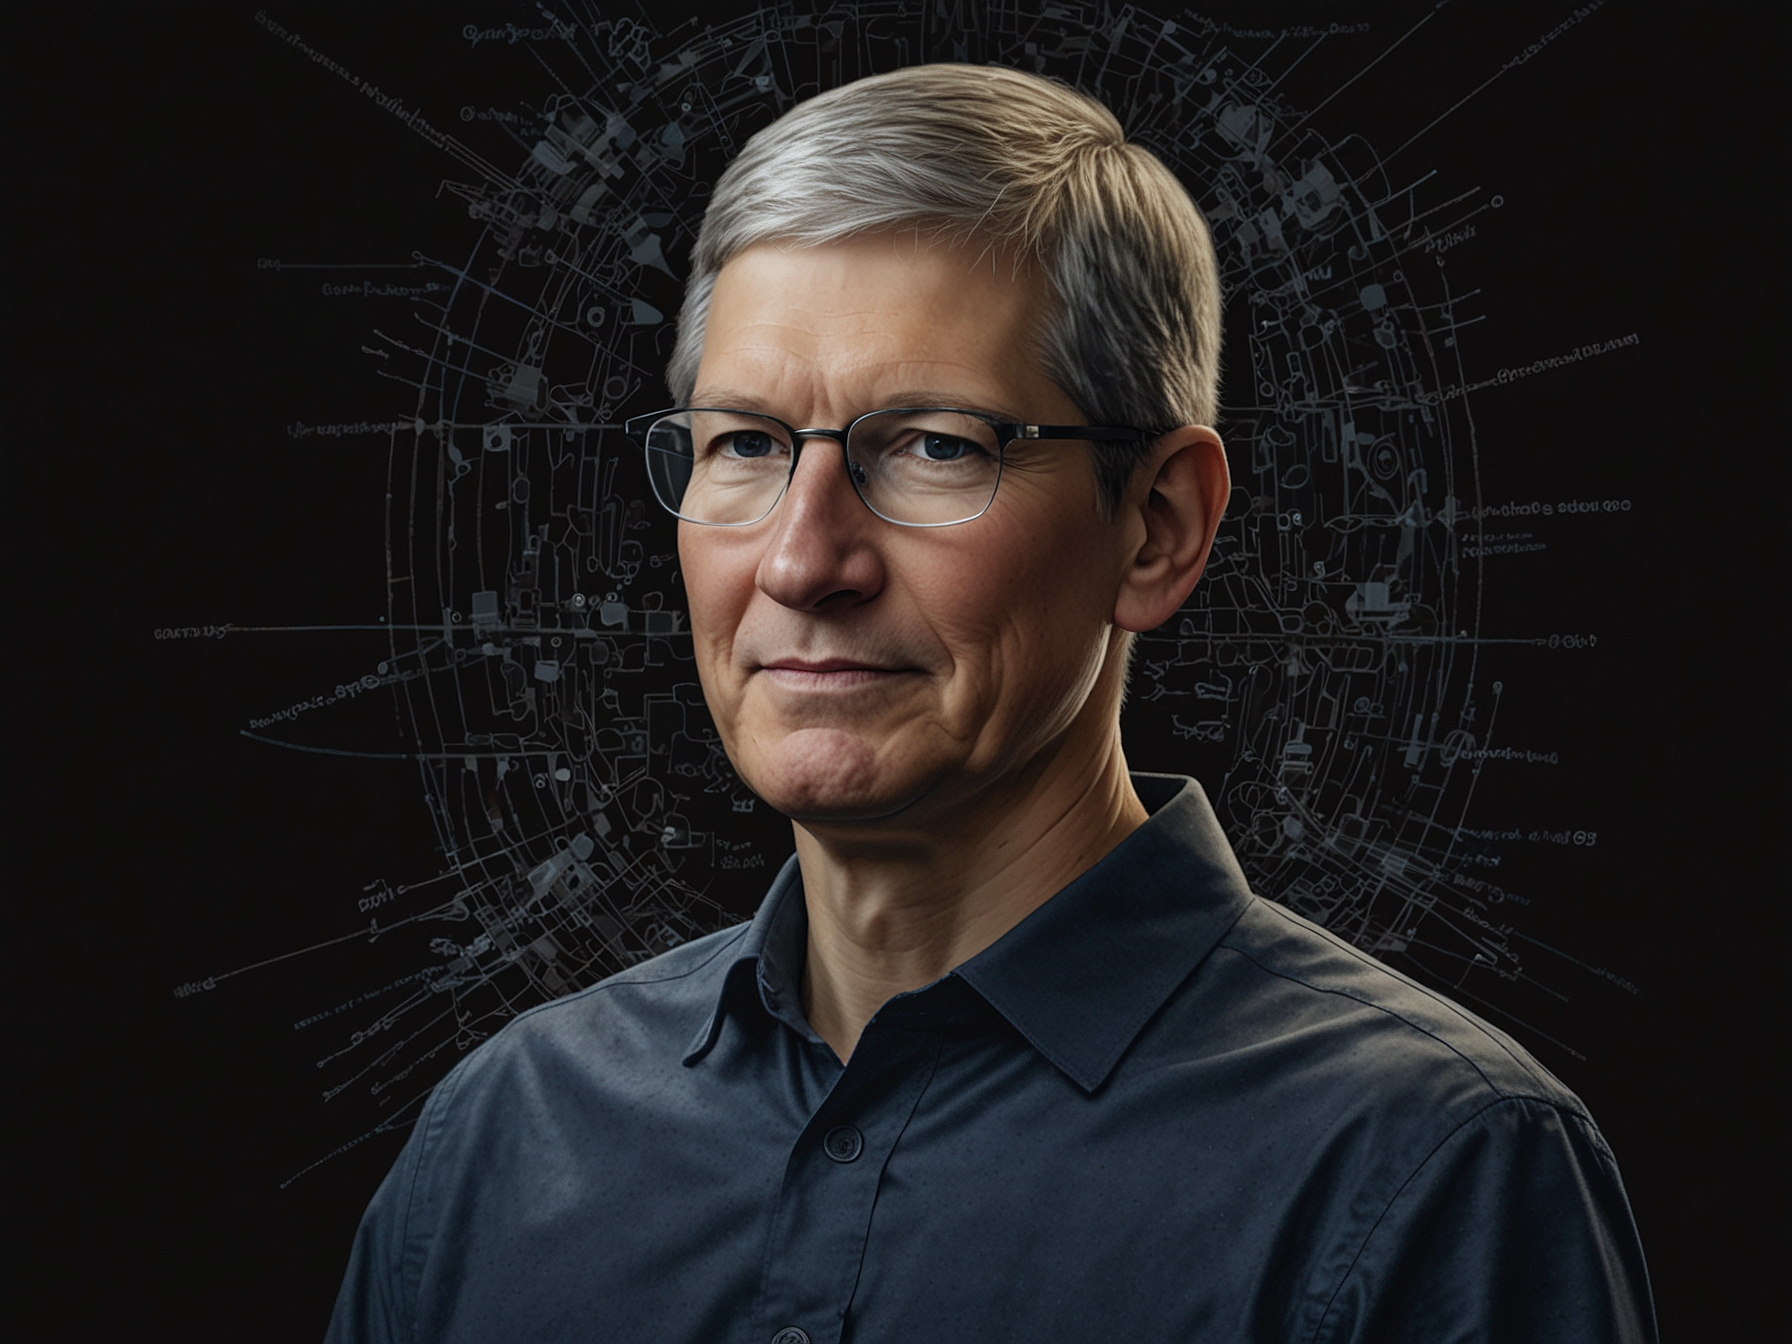 Apple's CEO Tim Cook showcases the company's latest advancements in AI technology during a keynote presentation.